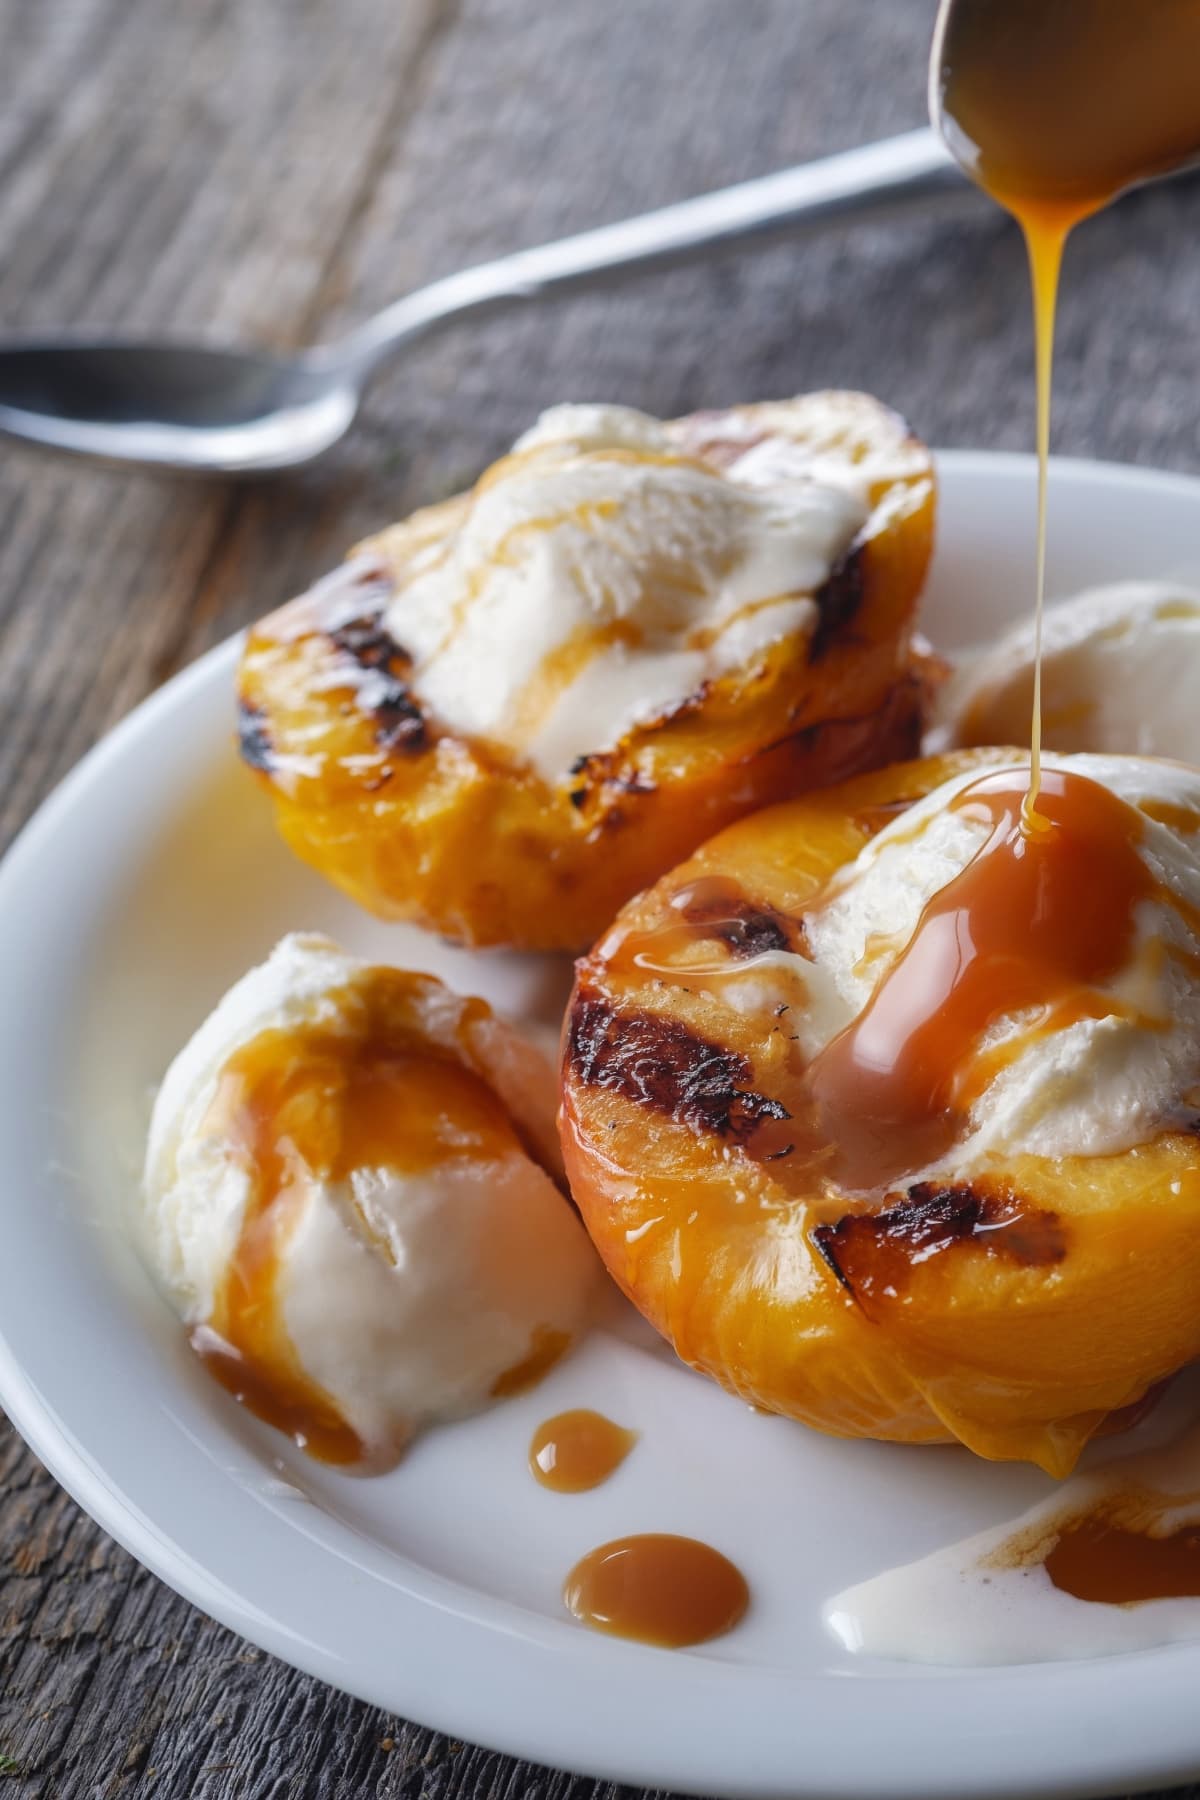 Grilled peaches topped with vanilla ice cream drizzled with caramel syrup.